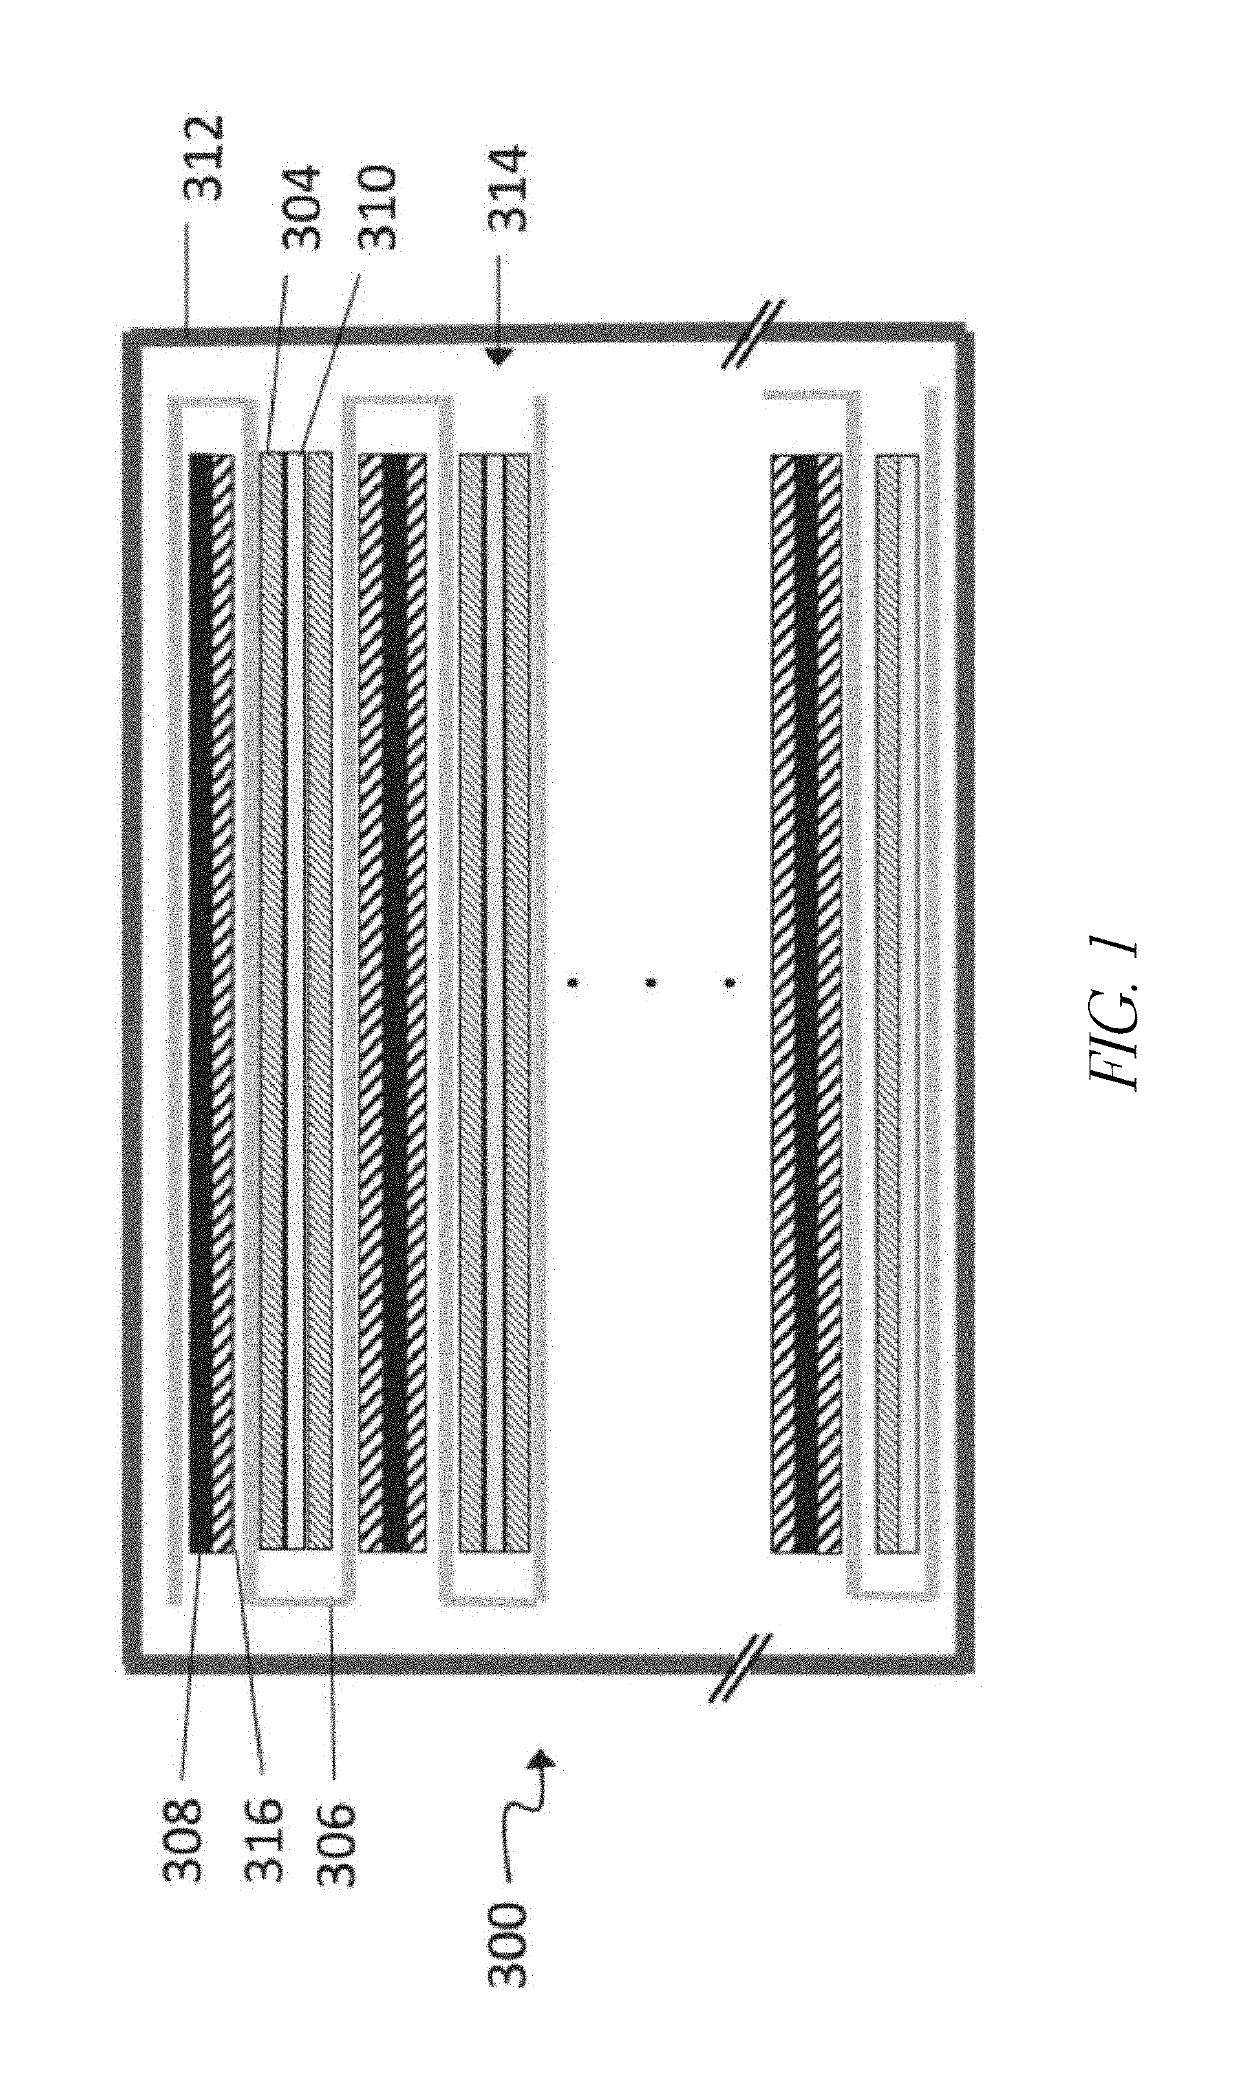 Silicon-based energy storage devices with fluorinated polymer containing electrolyte additives